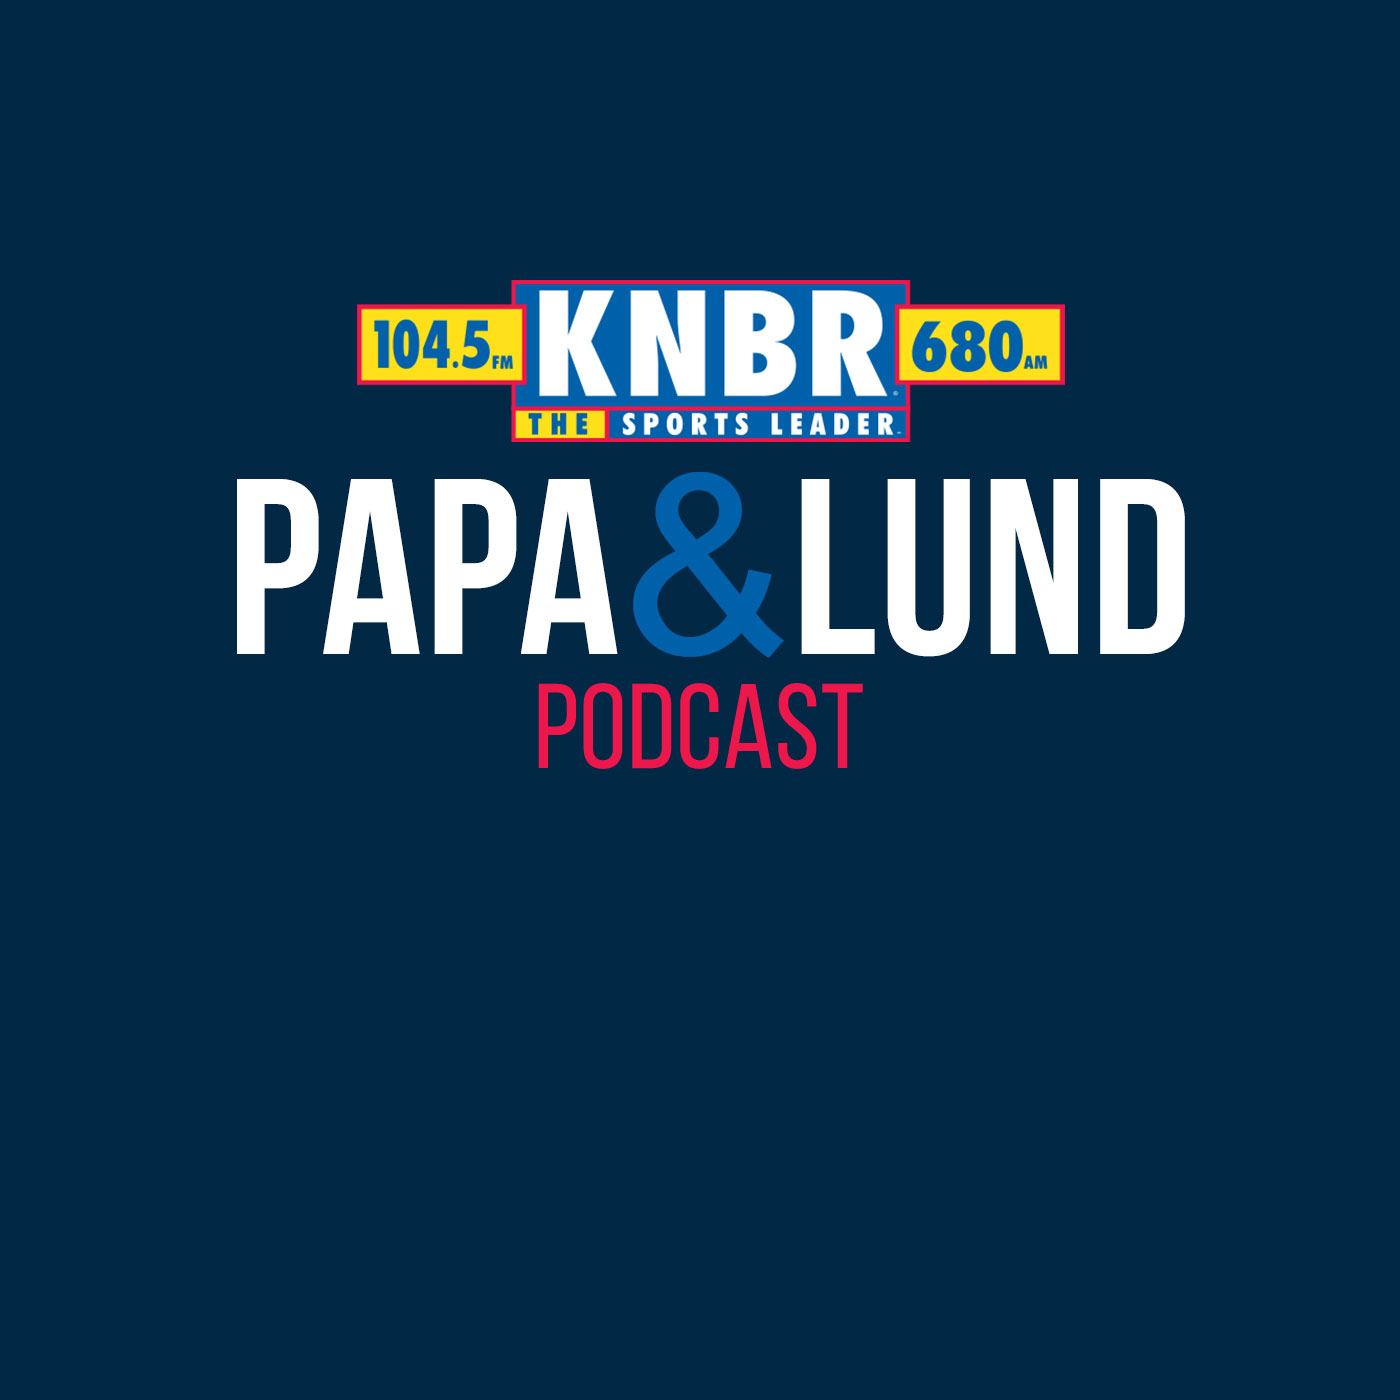 6-13 Ron Wotus joins Papa & Lund and discusses the Giants taking 2 of 3 from the Astros and  sticking with Austin Slater through his early season struggles